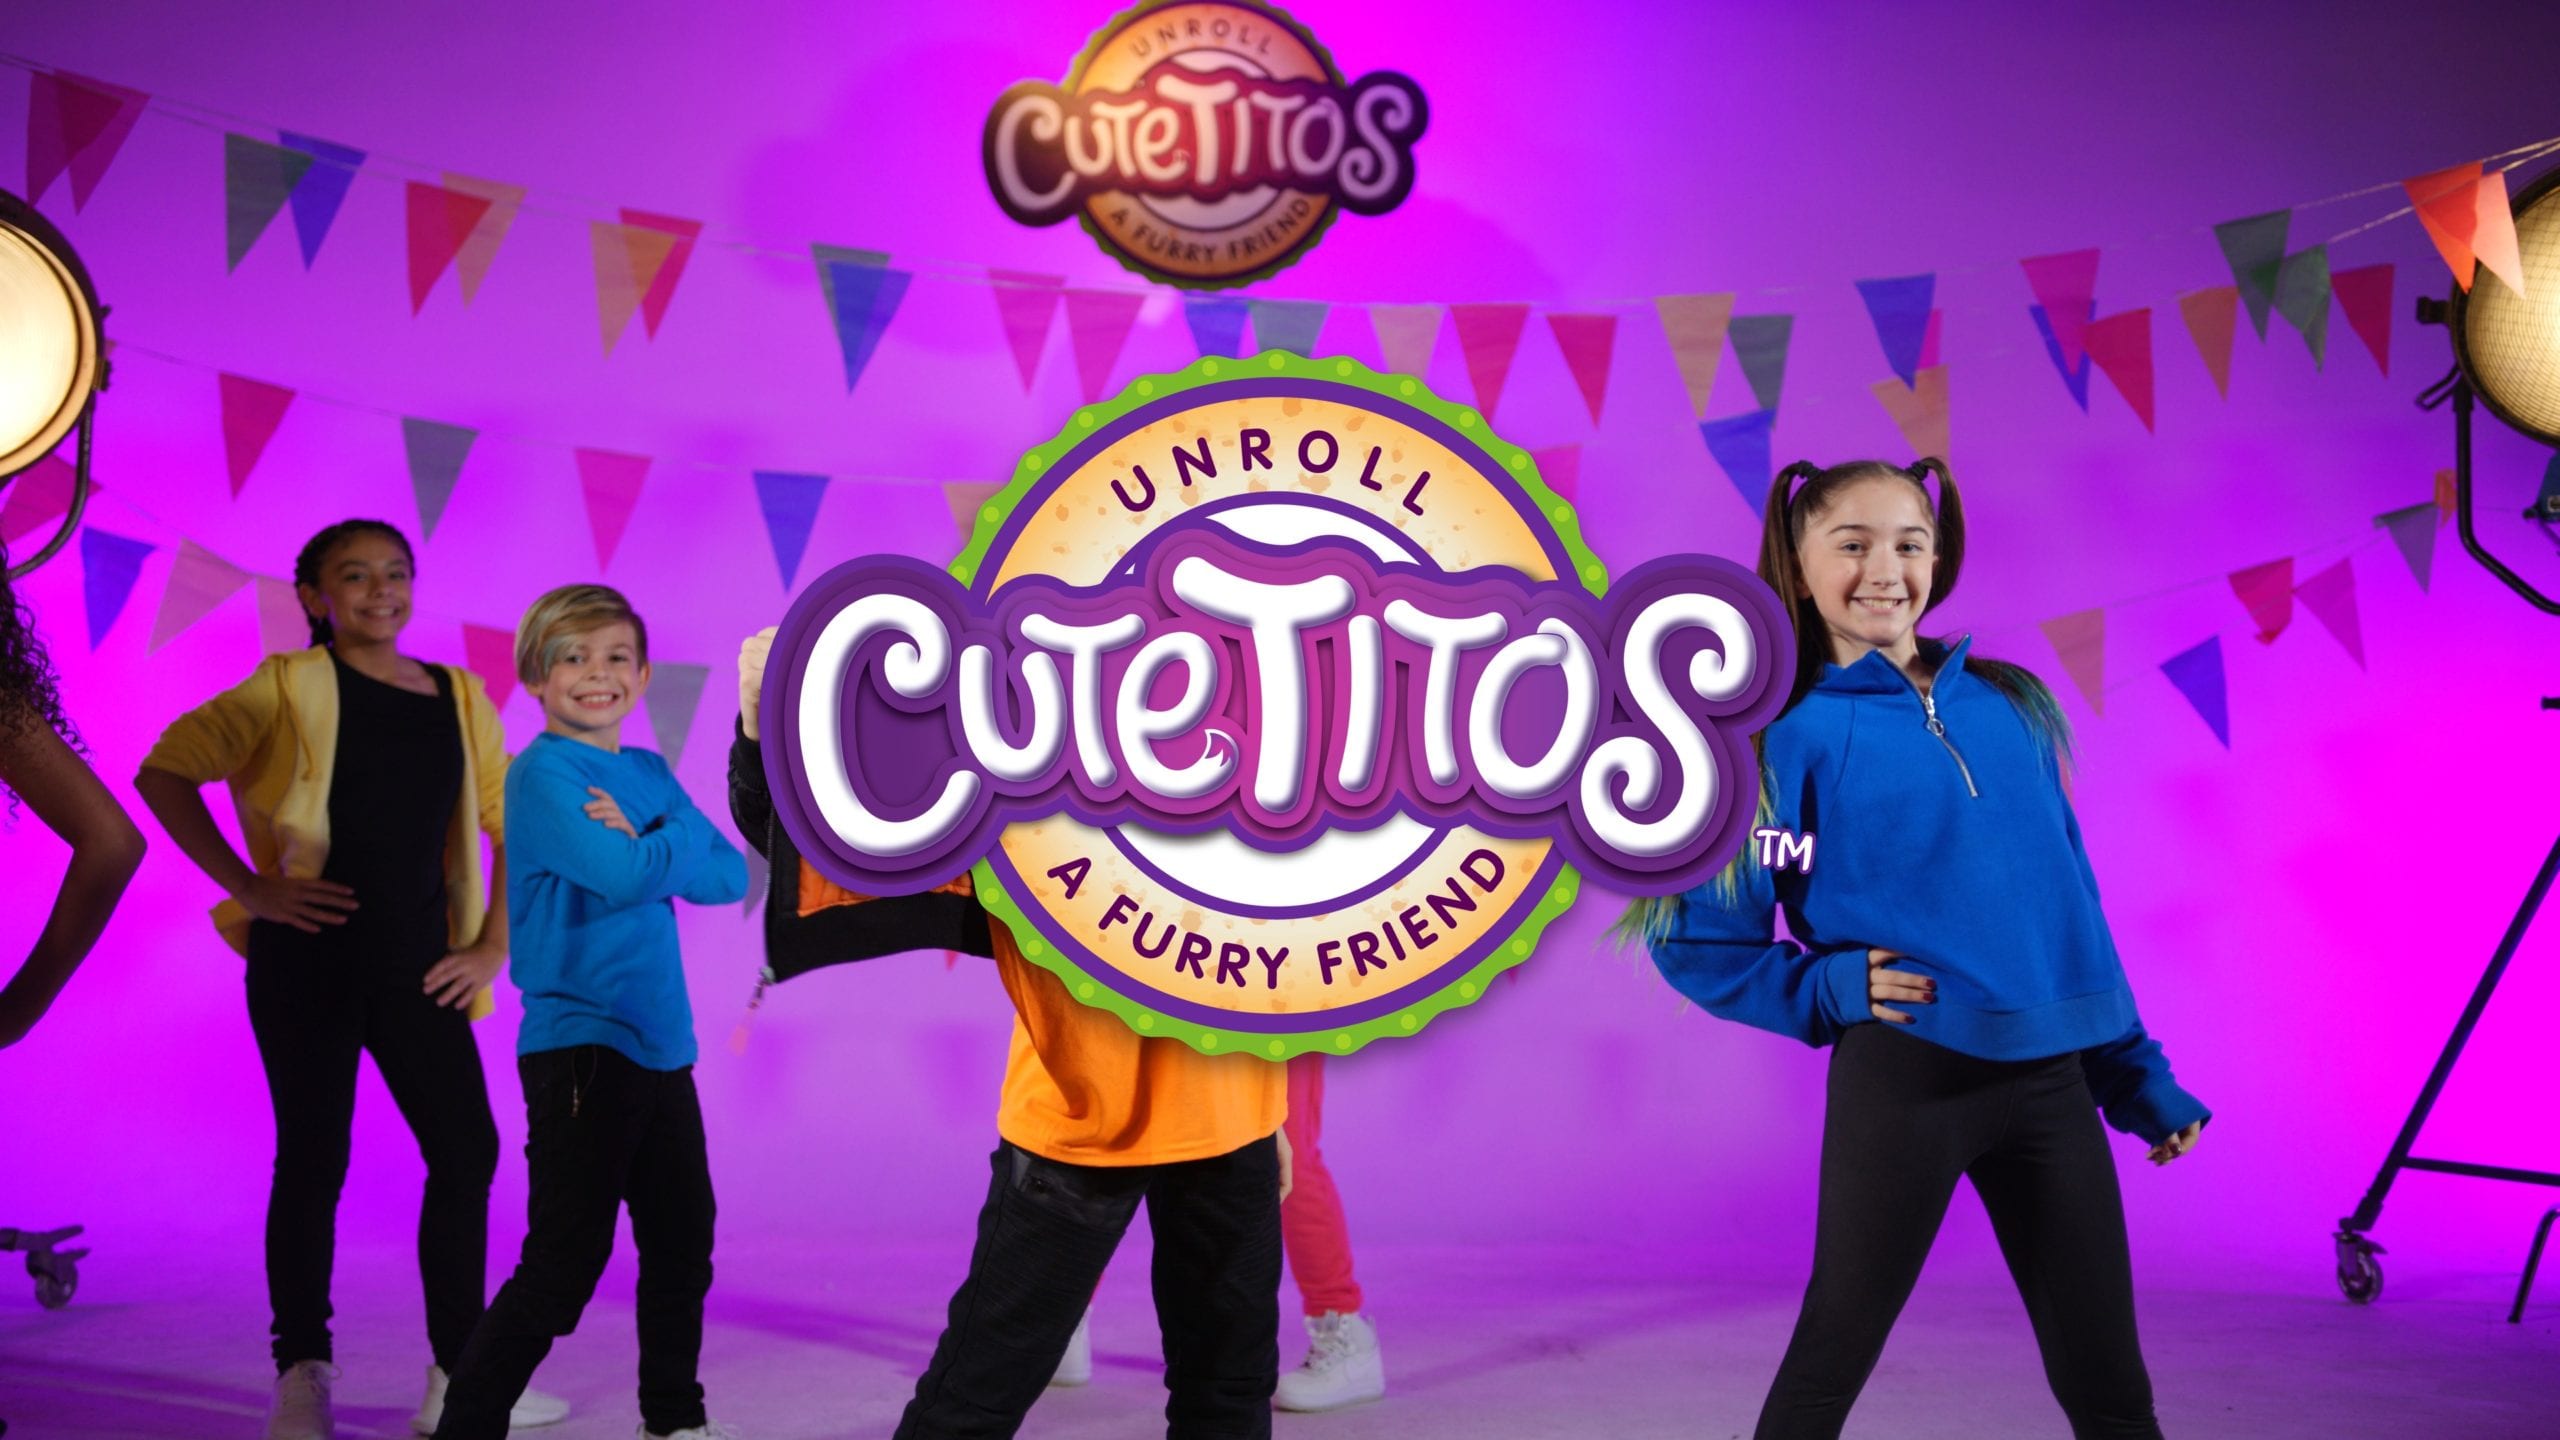 IU C&I Studios Page Basic Fun Cutetitos Logo superimposed on group of smiling boys and girls posing on set with purple background